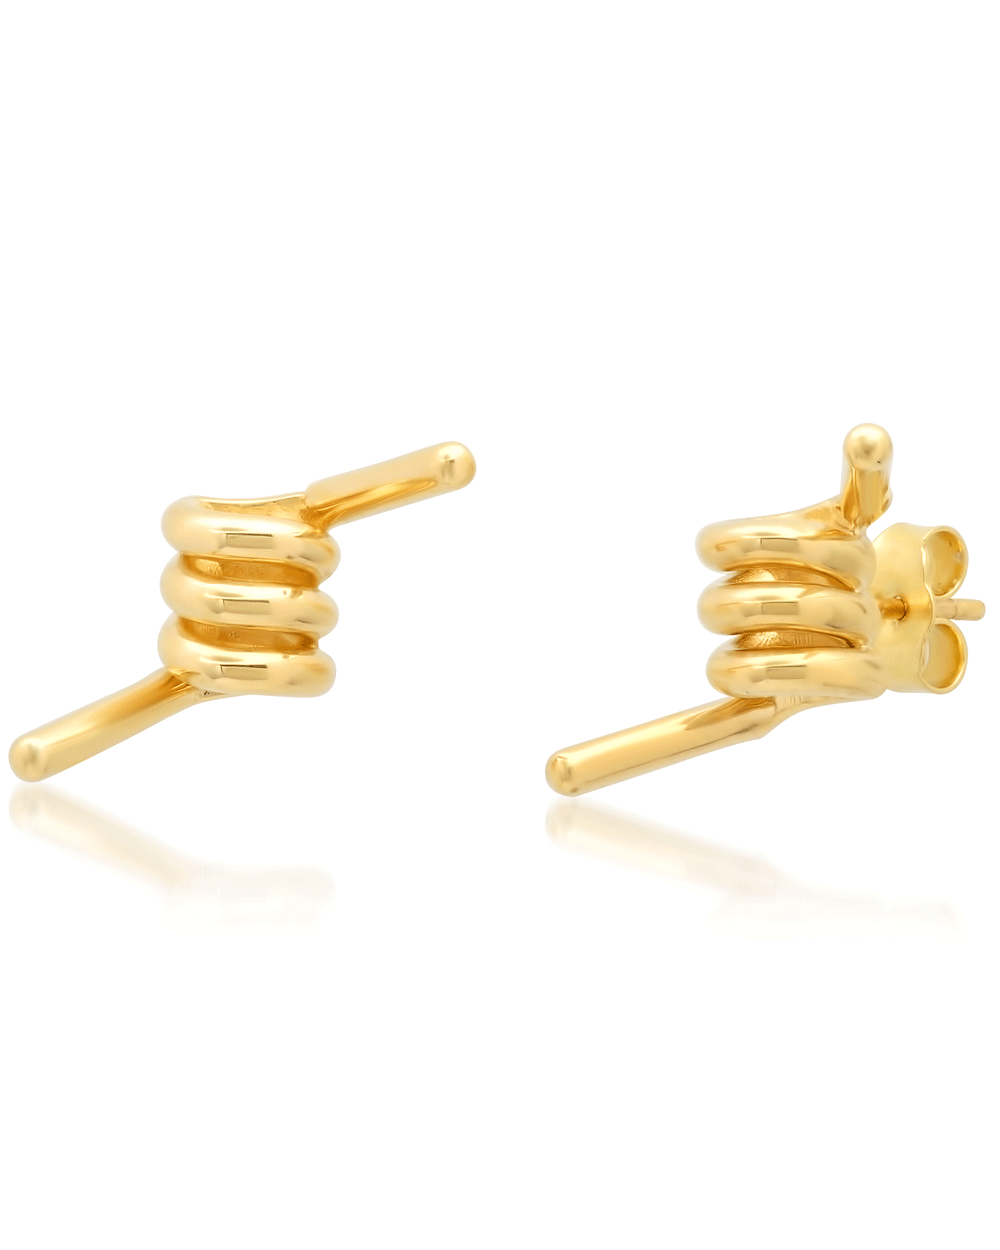 18k Yellow Gold Barbed Wire Stud Earrings